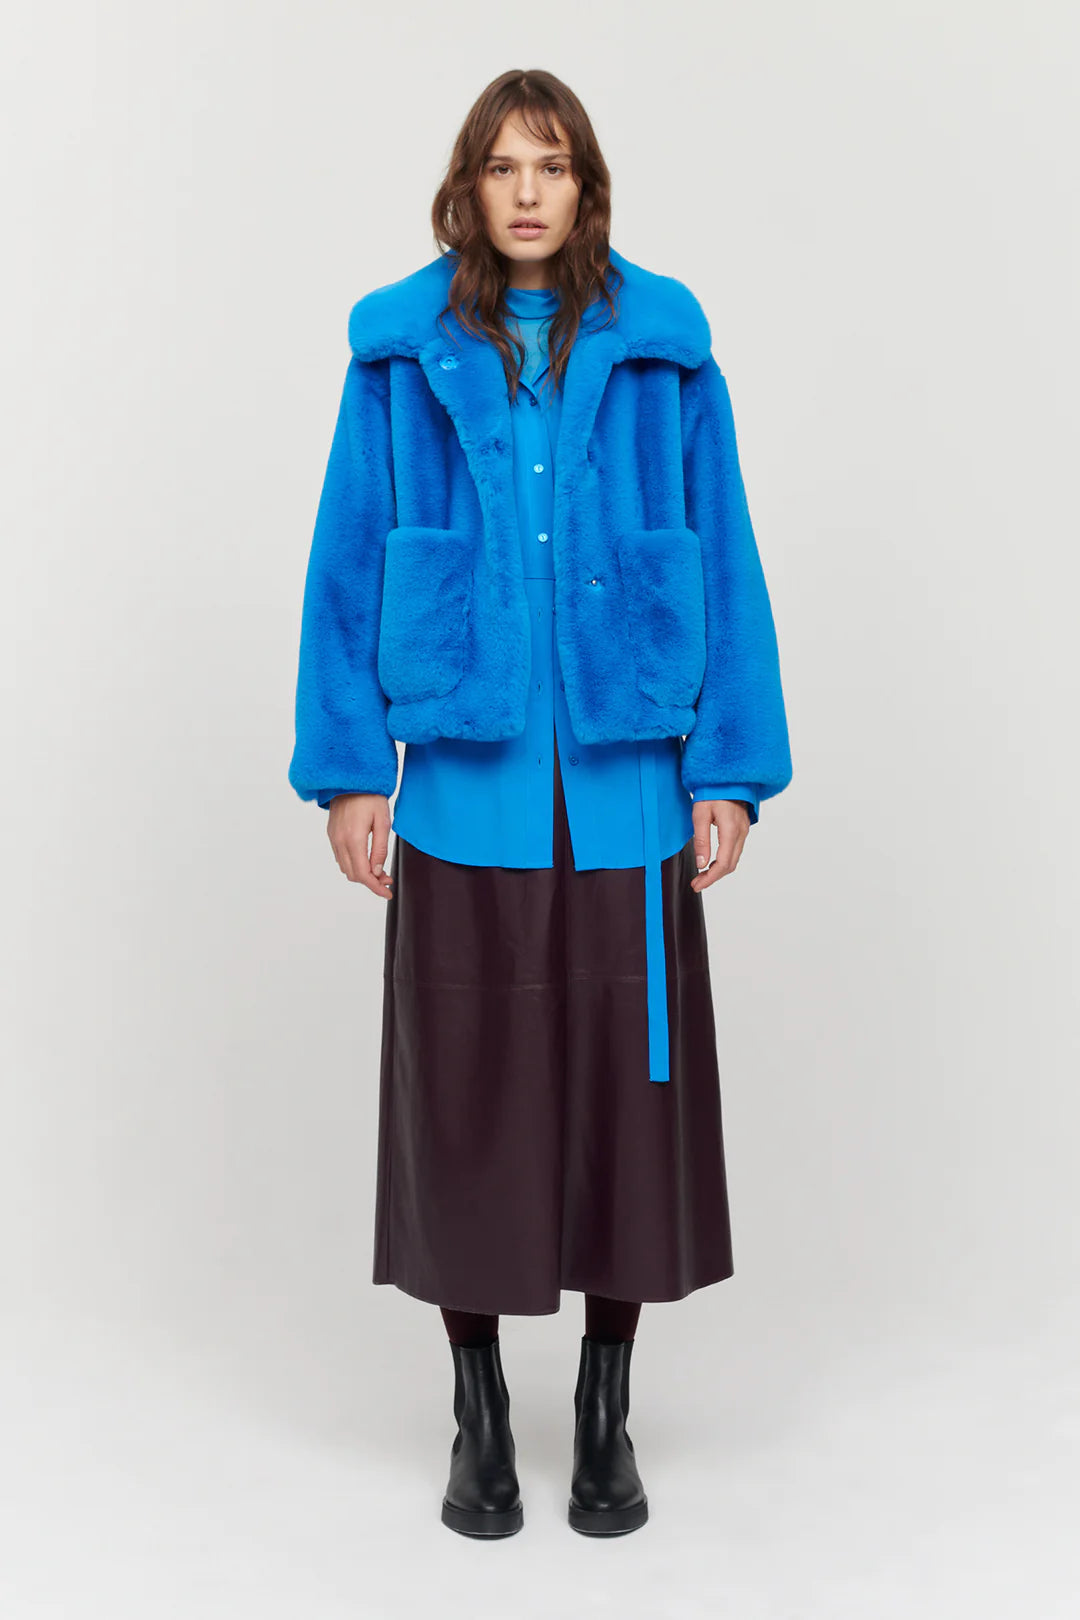 Bright blue boxy faux fur jacket with large collar and two front patch pockets